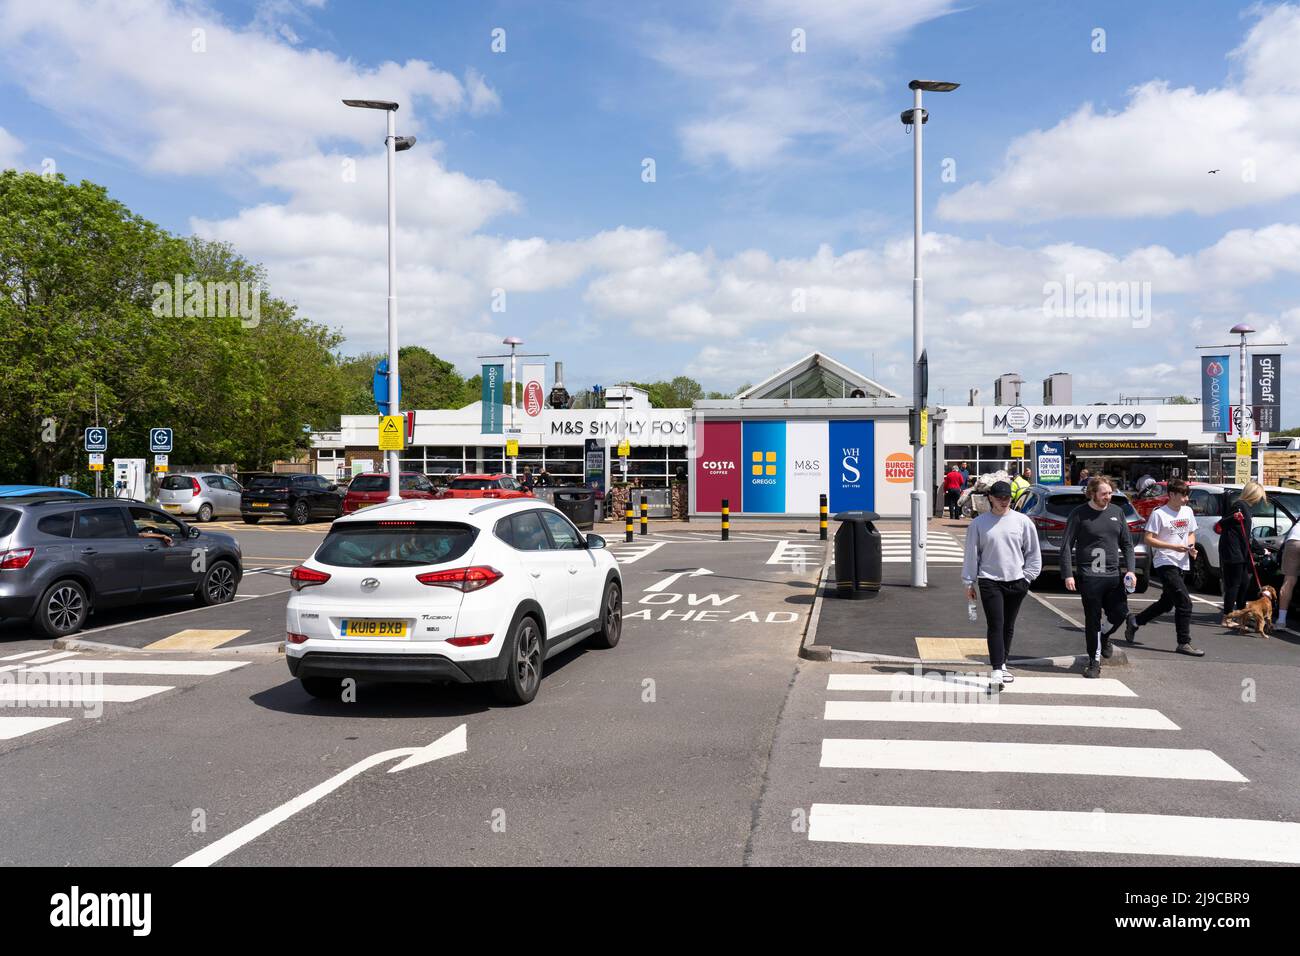 Leigh Delamere motorway service station services off the M4 in England is one of Europe's largest service stations. Owned by Moto Hospitality Stock Photo